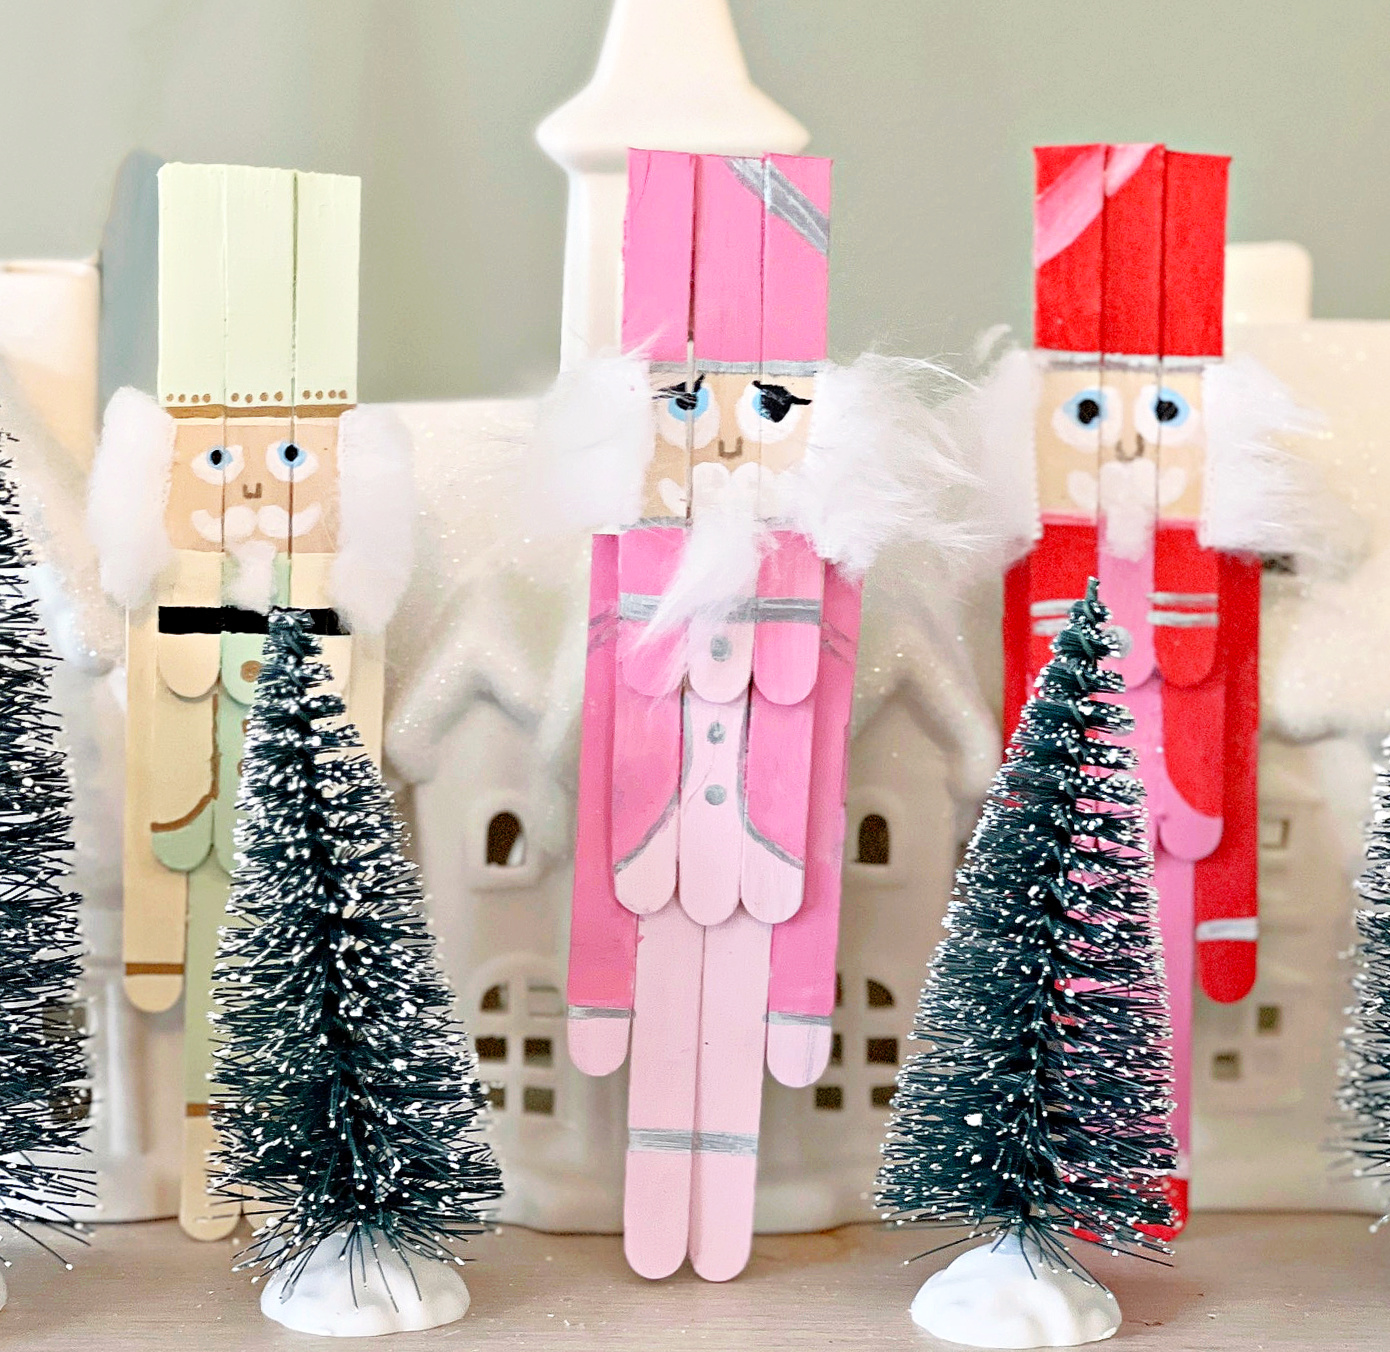 How to Make Popsicle Stick Nutcrackers